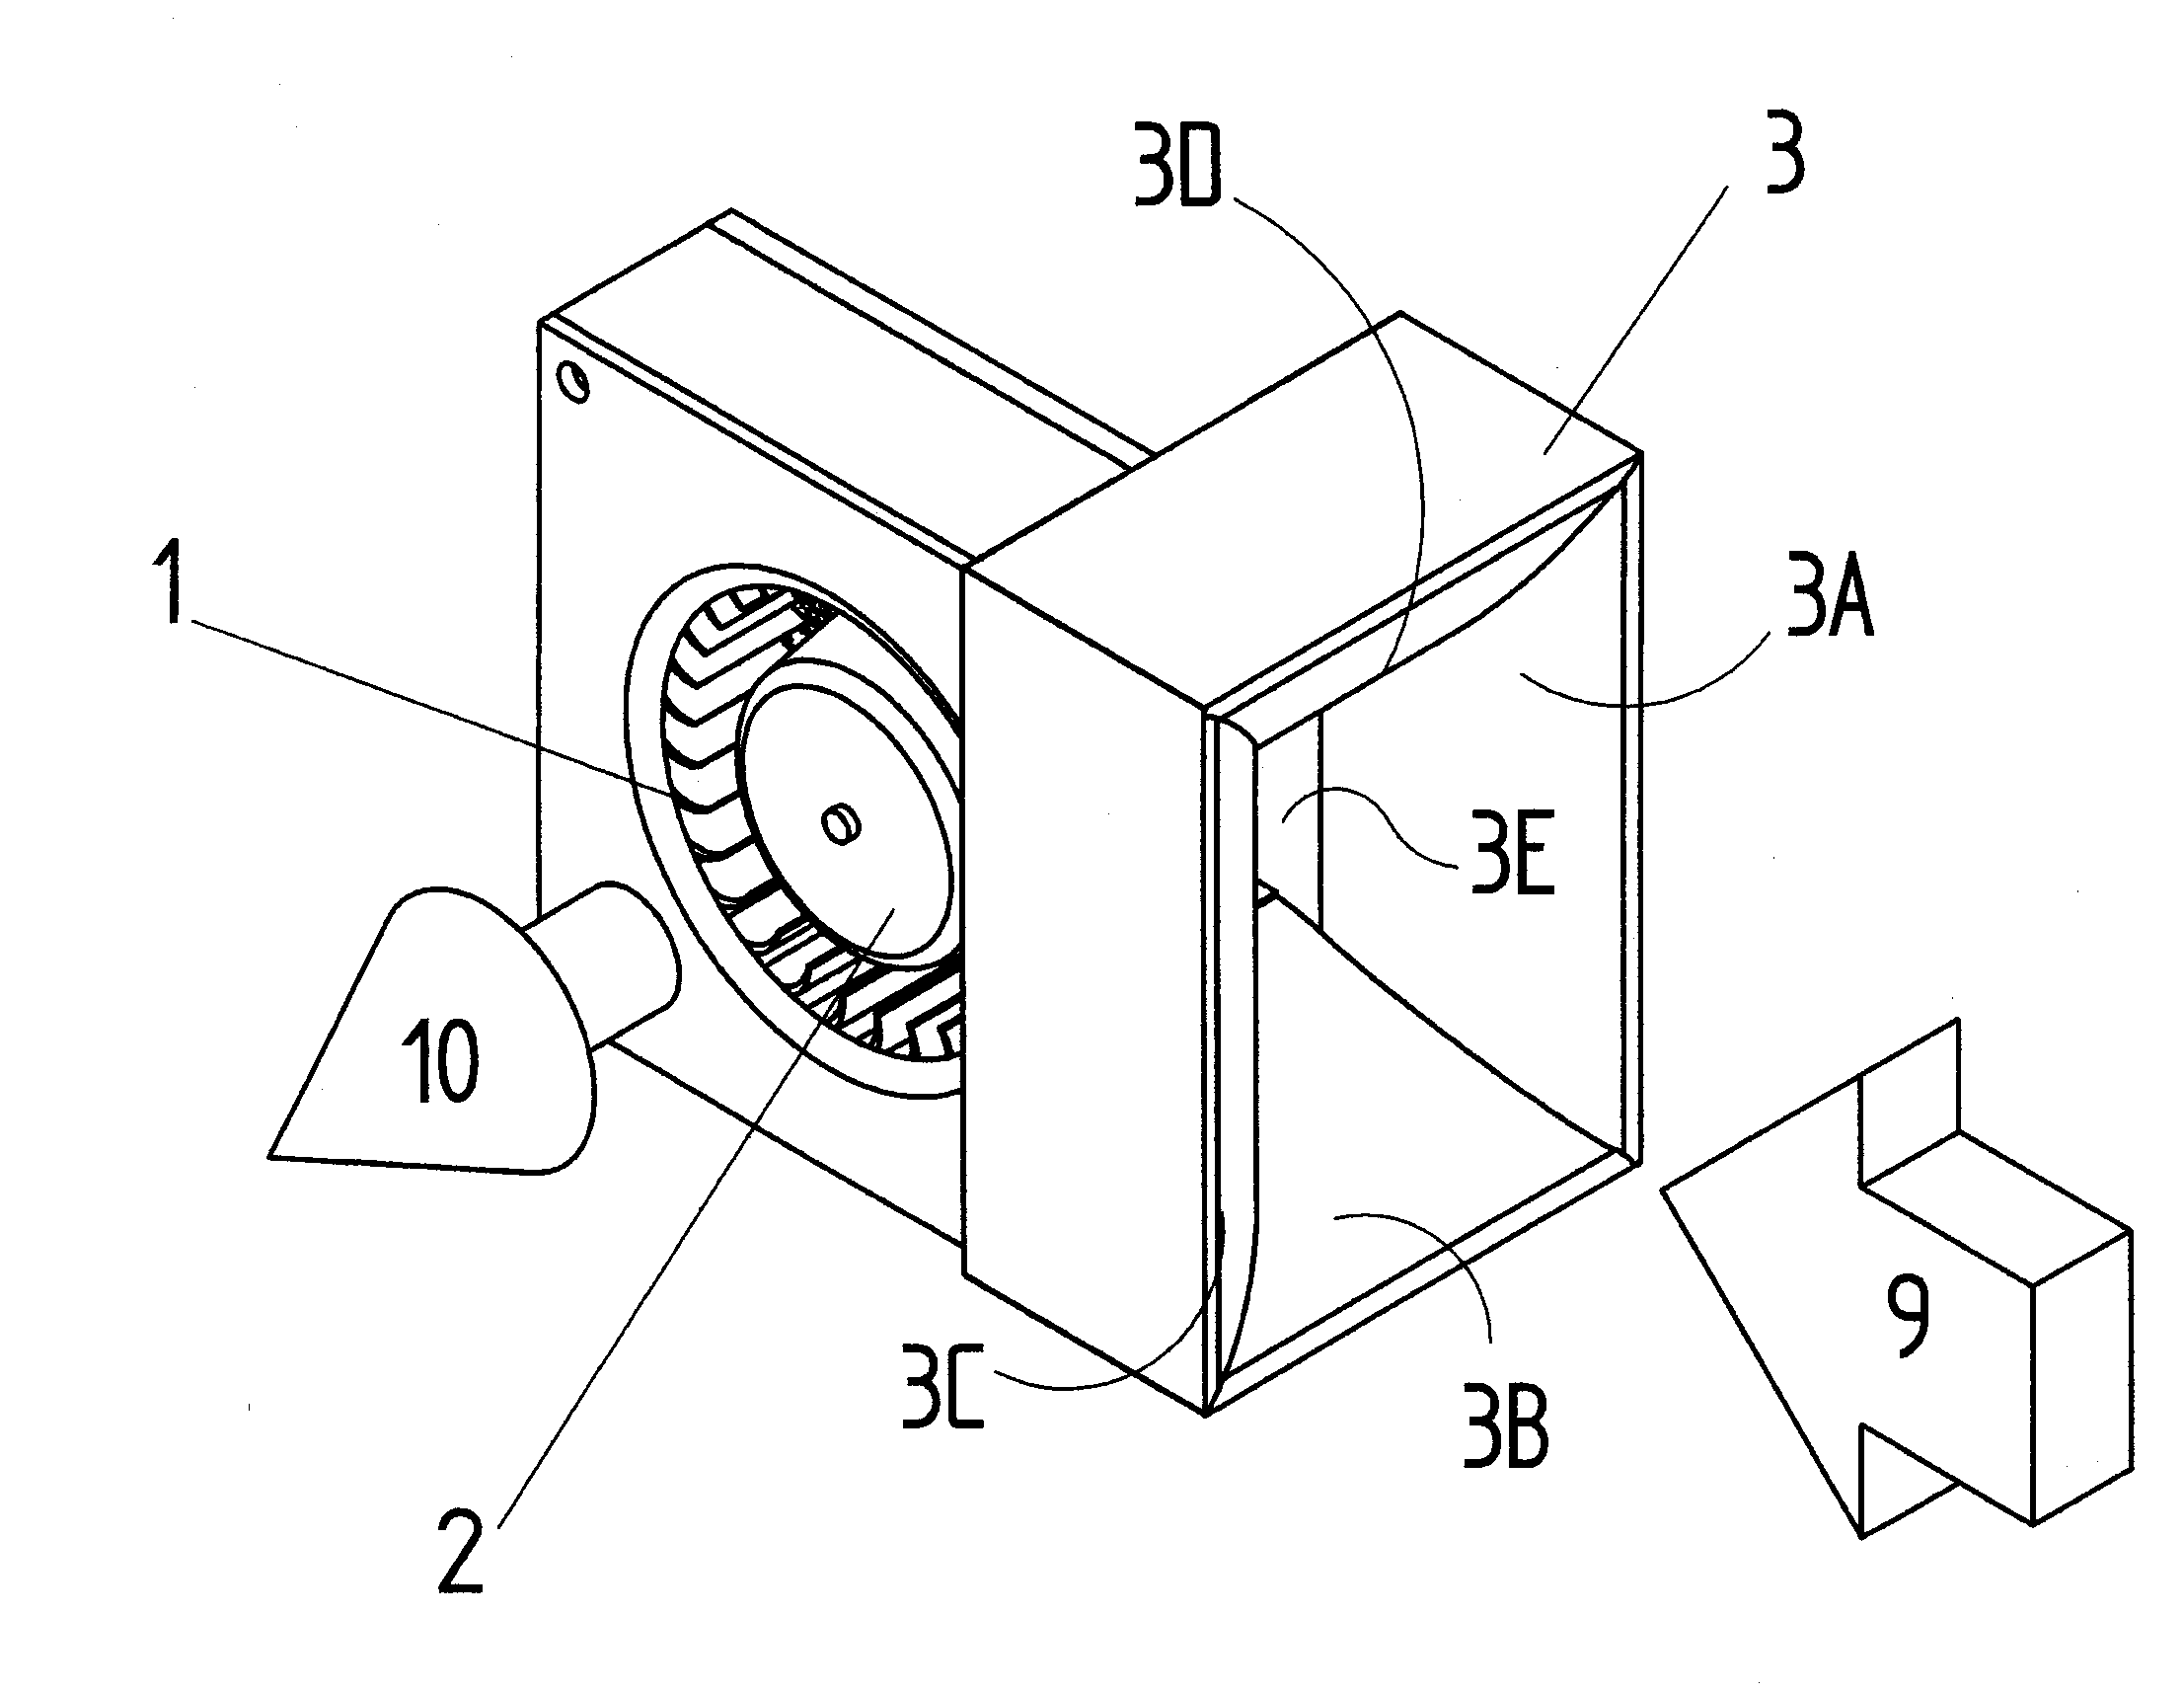 Wind-driven turbine cells and arrays